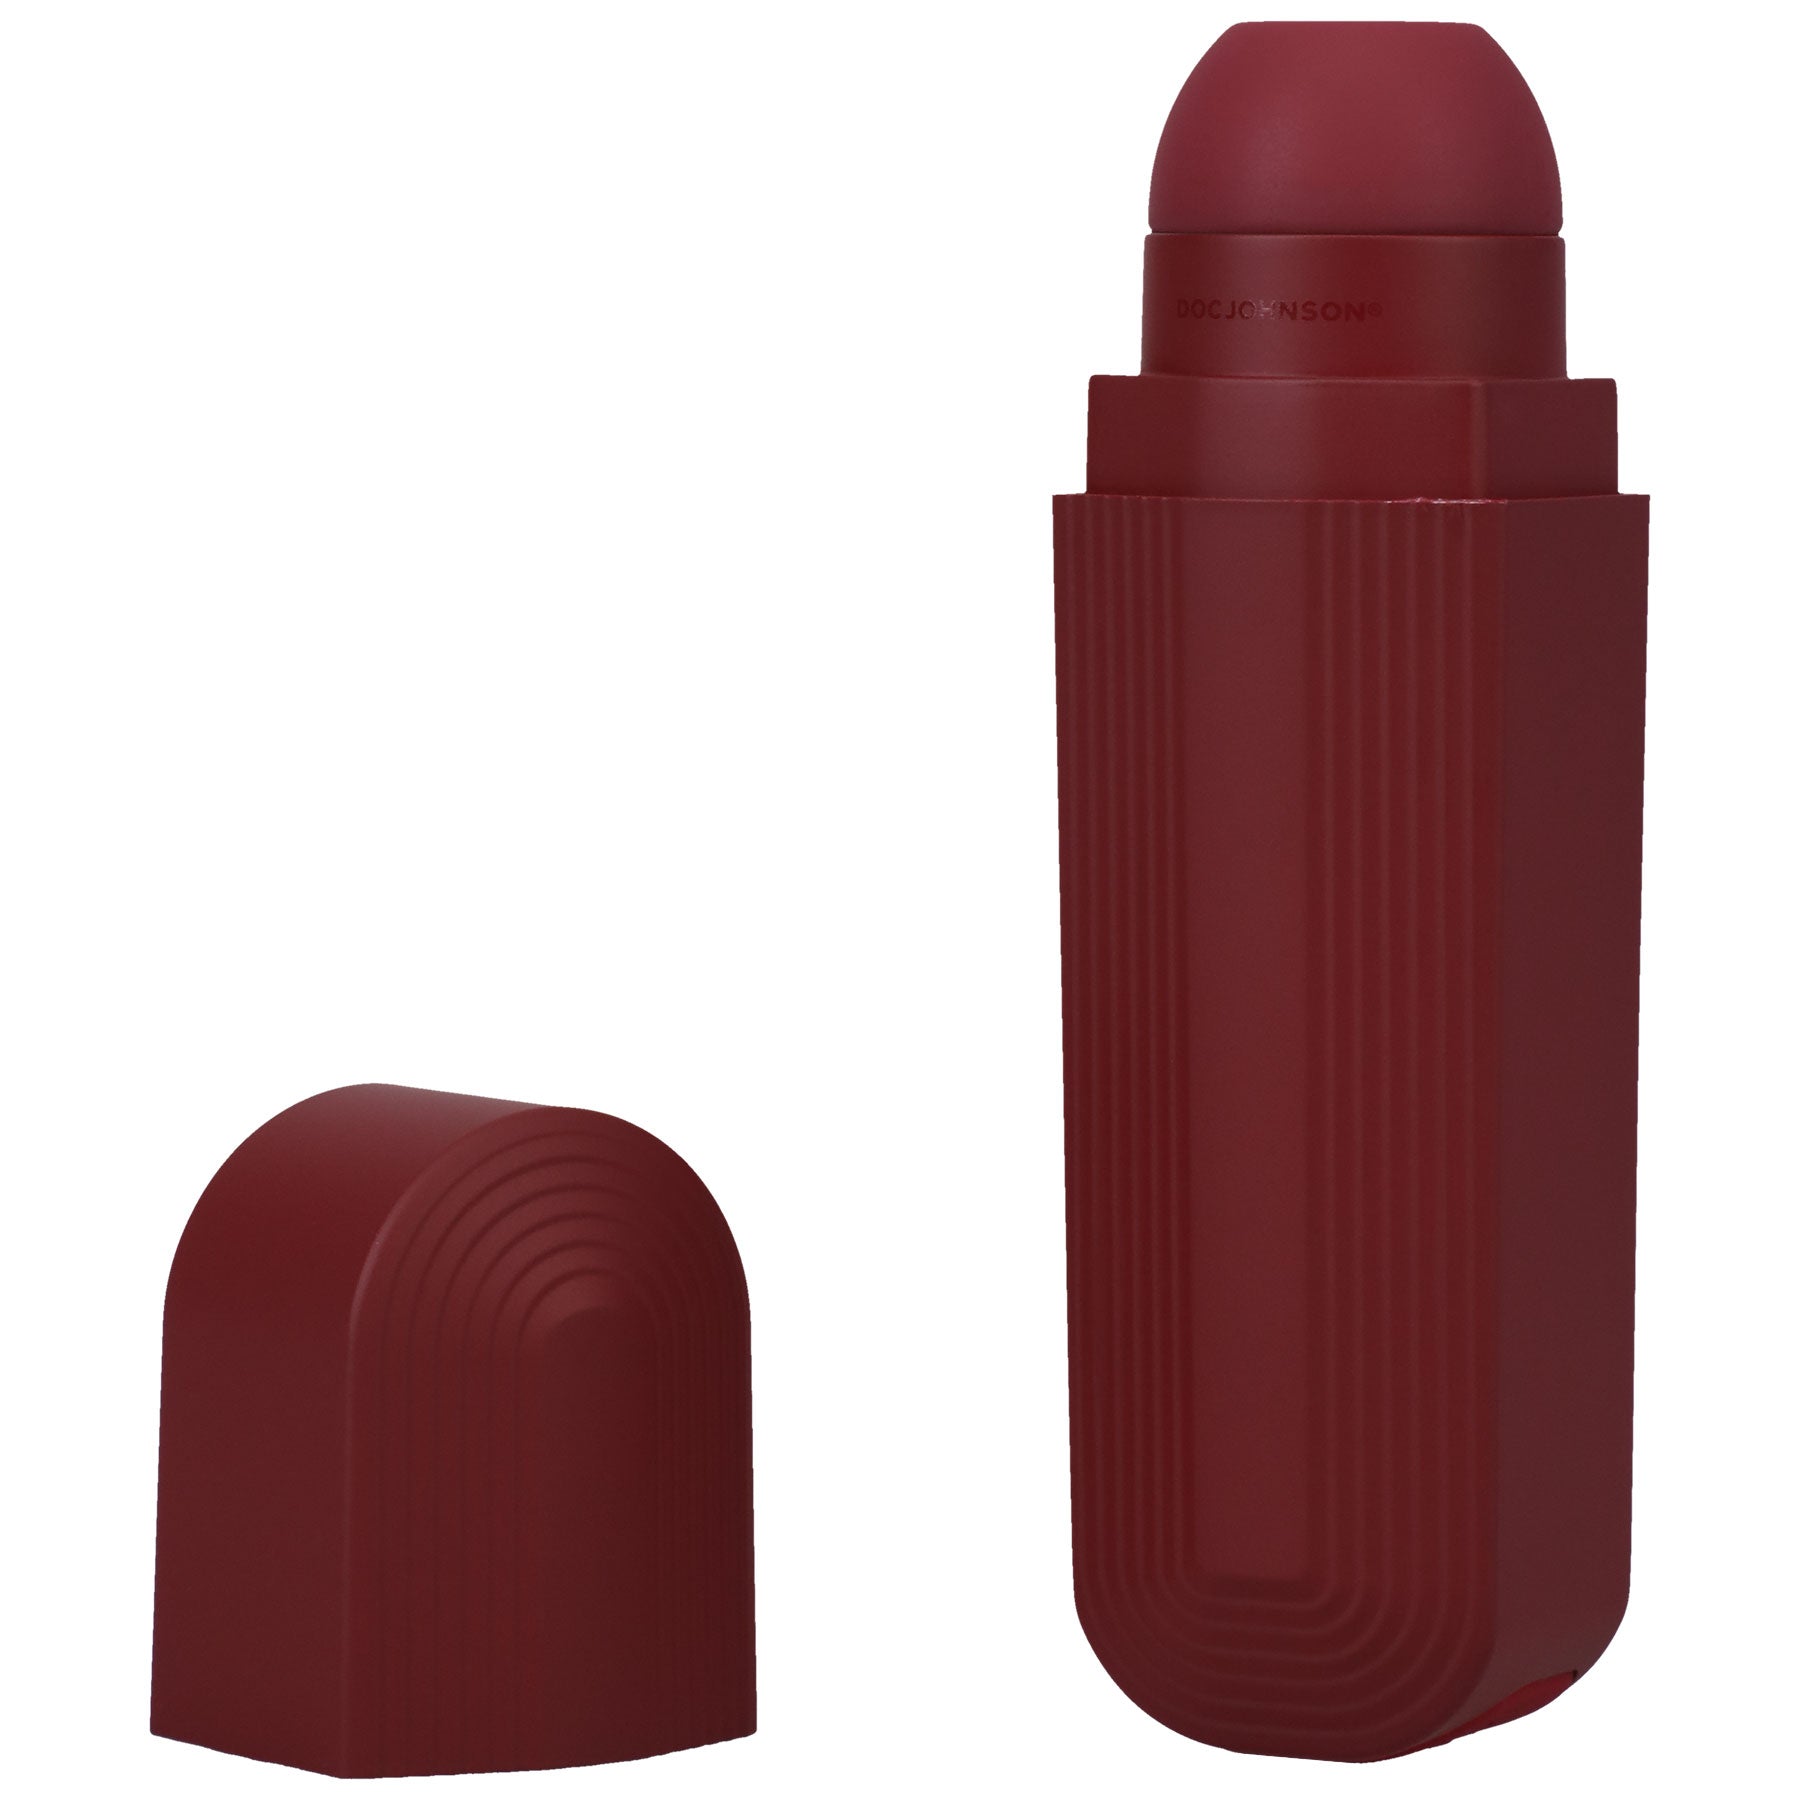 This Product Sucks - Sucking Clitoral Stimulator - Rechargeable - Red-1